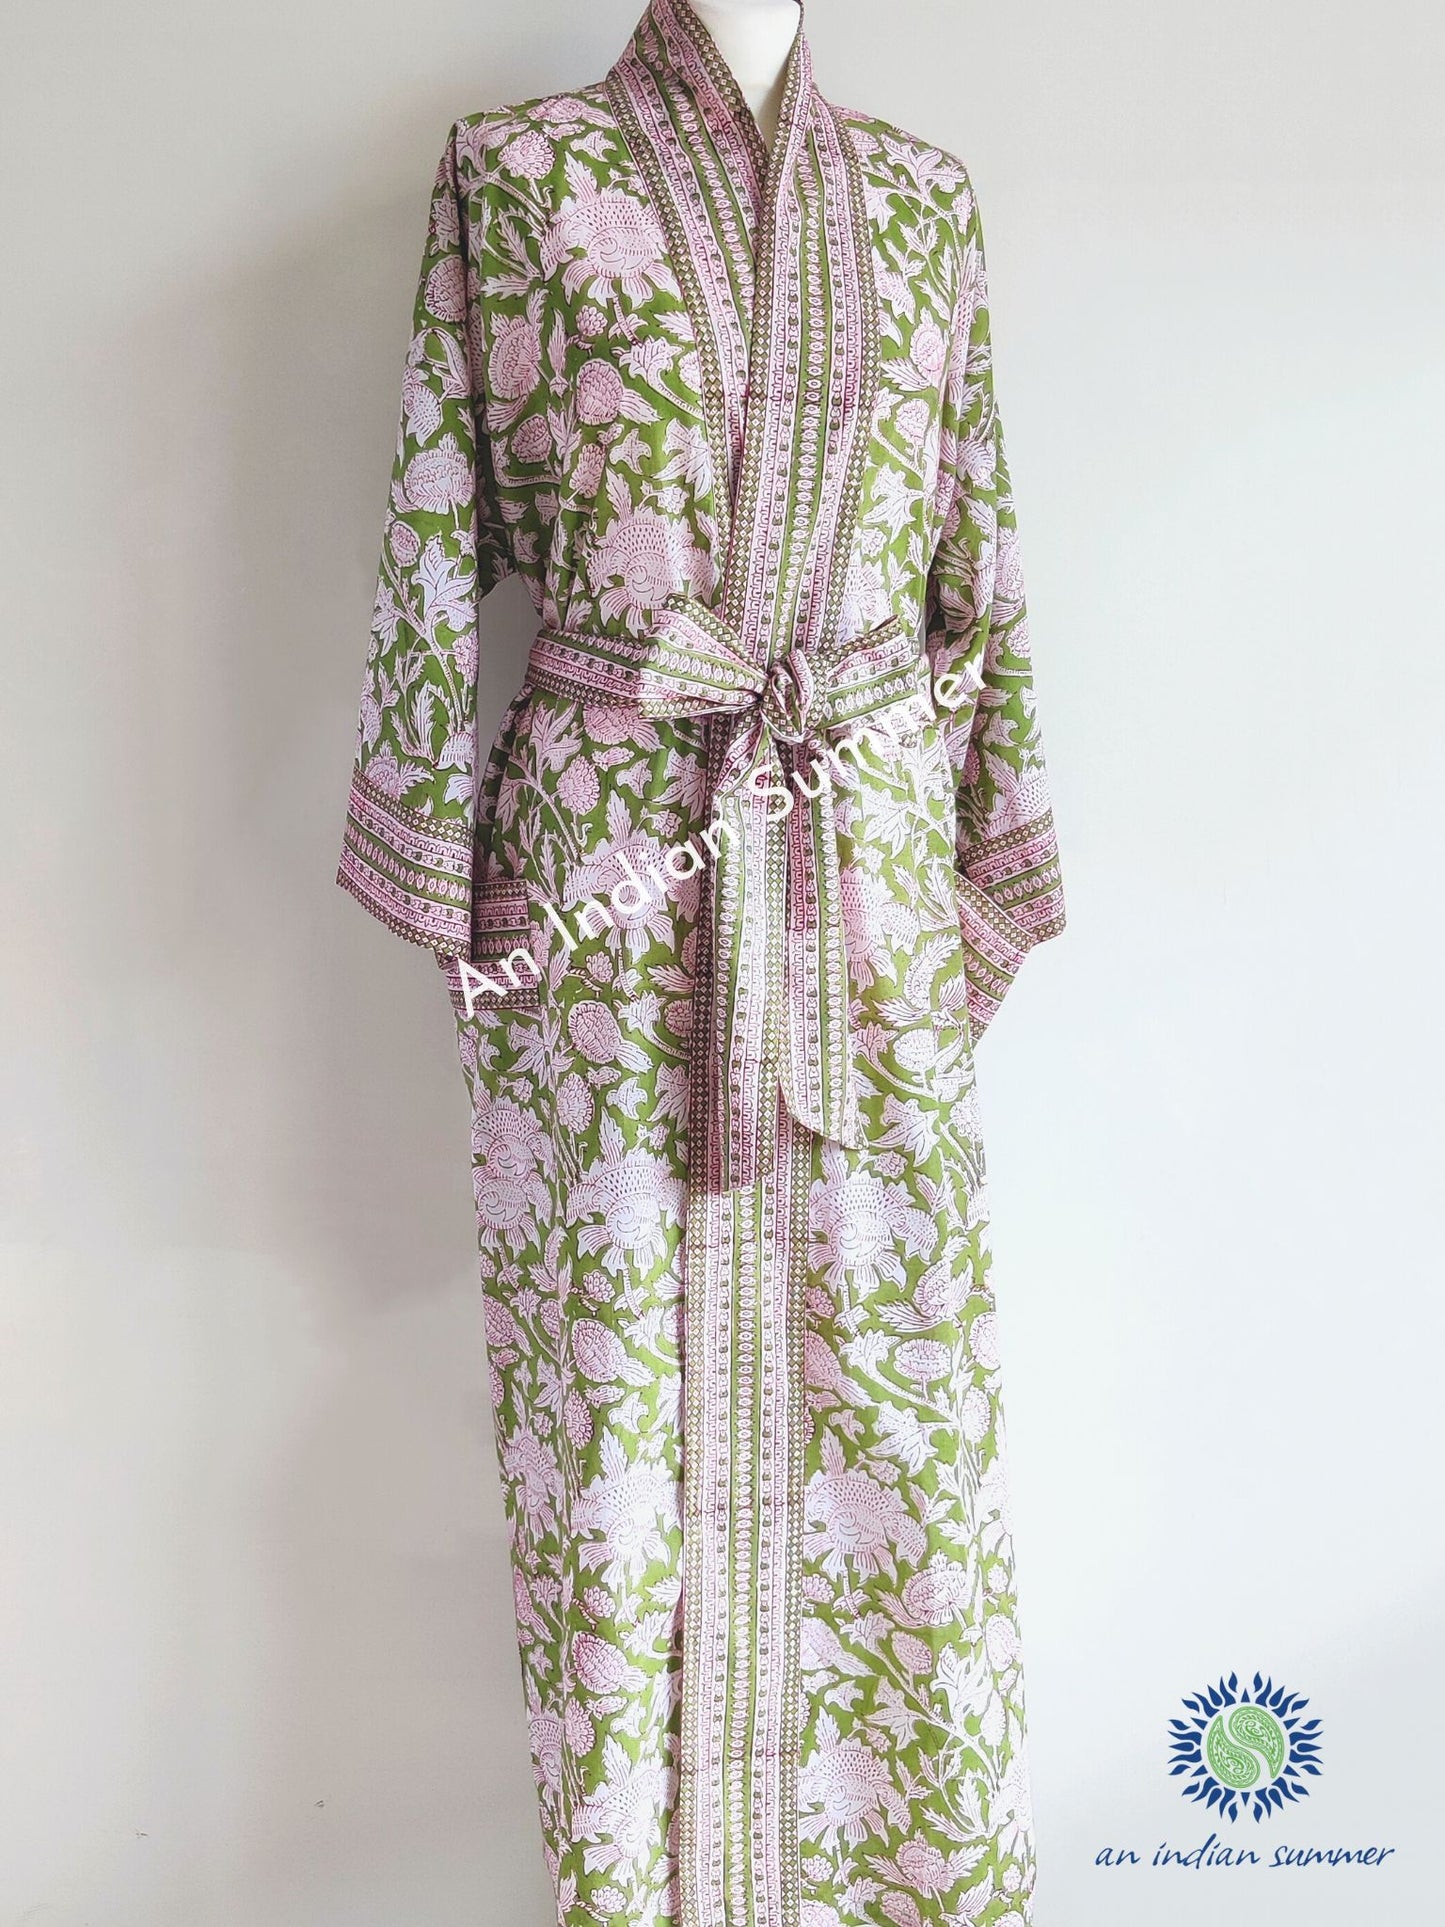 Long Kimono Robe | Thistle | Apple Green | Botanical Block Print | Hand Block Printed | Cotton Voile | An Indian Summer | Seasonless Timeless Sustainable Ethical Authentic Artisan Conscious Clothing Lifestyle Brand